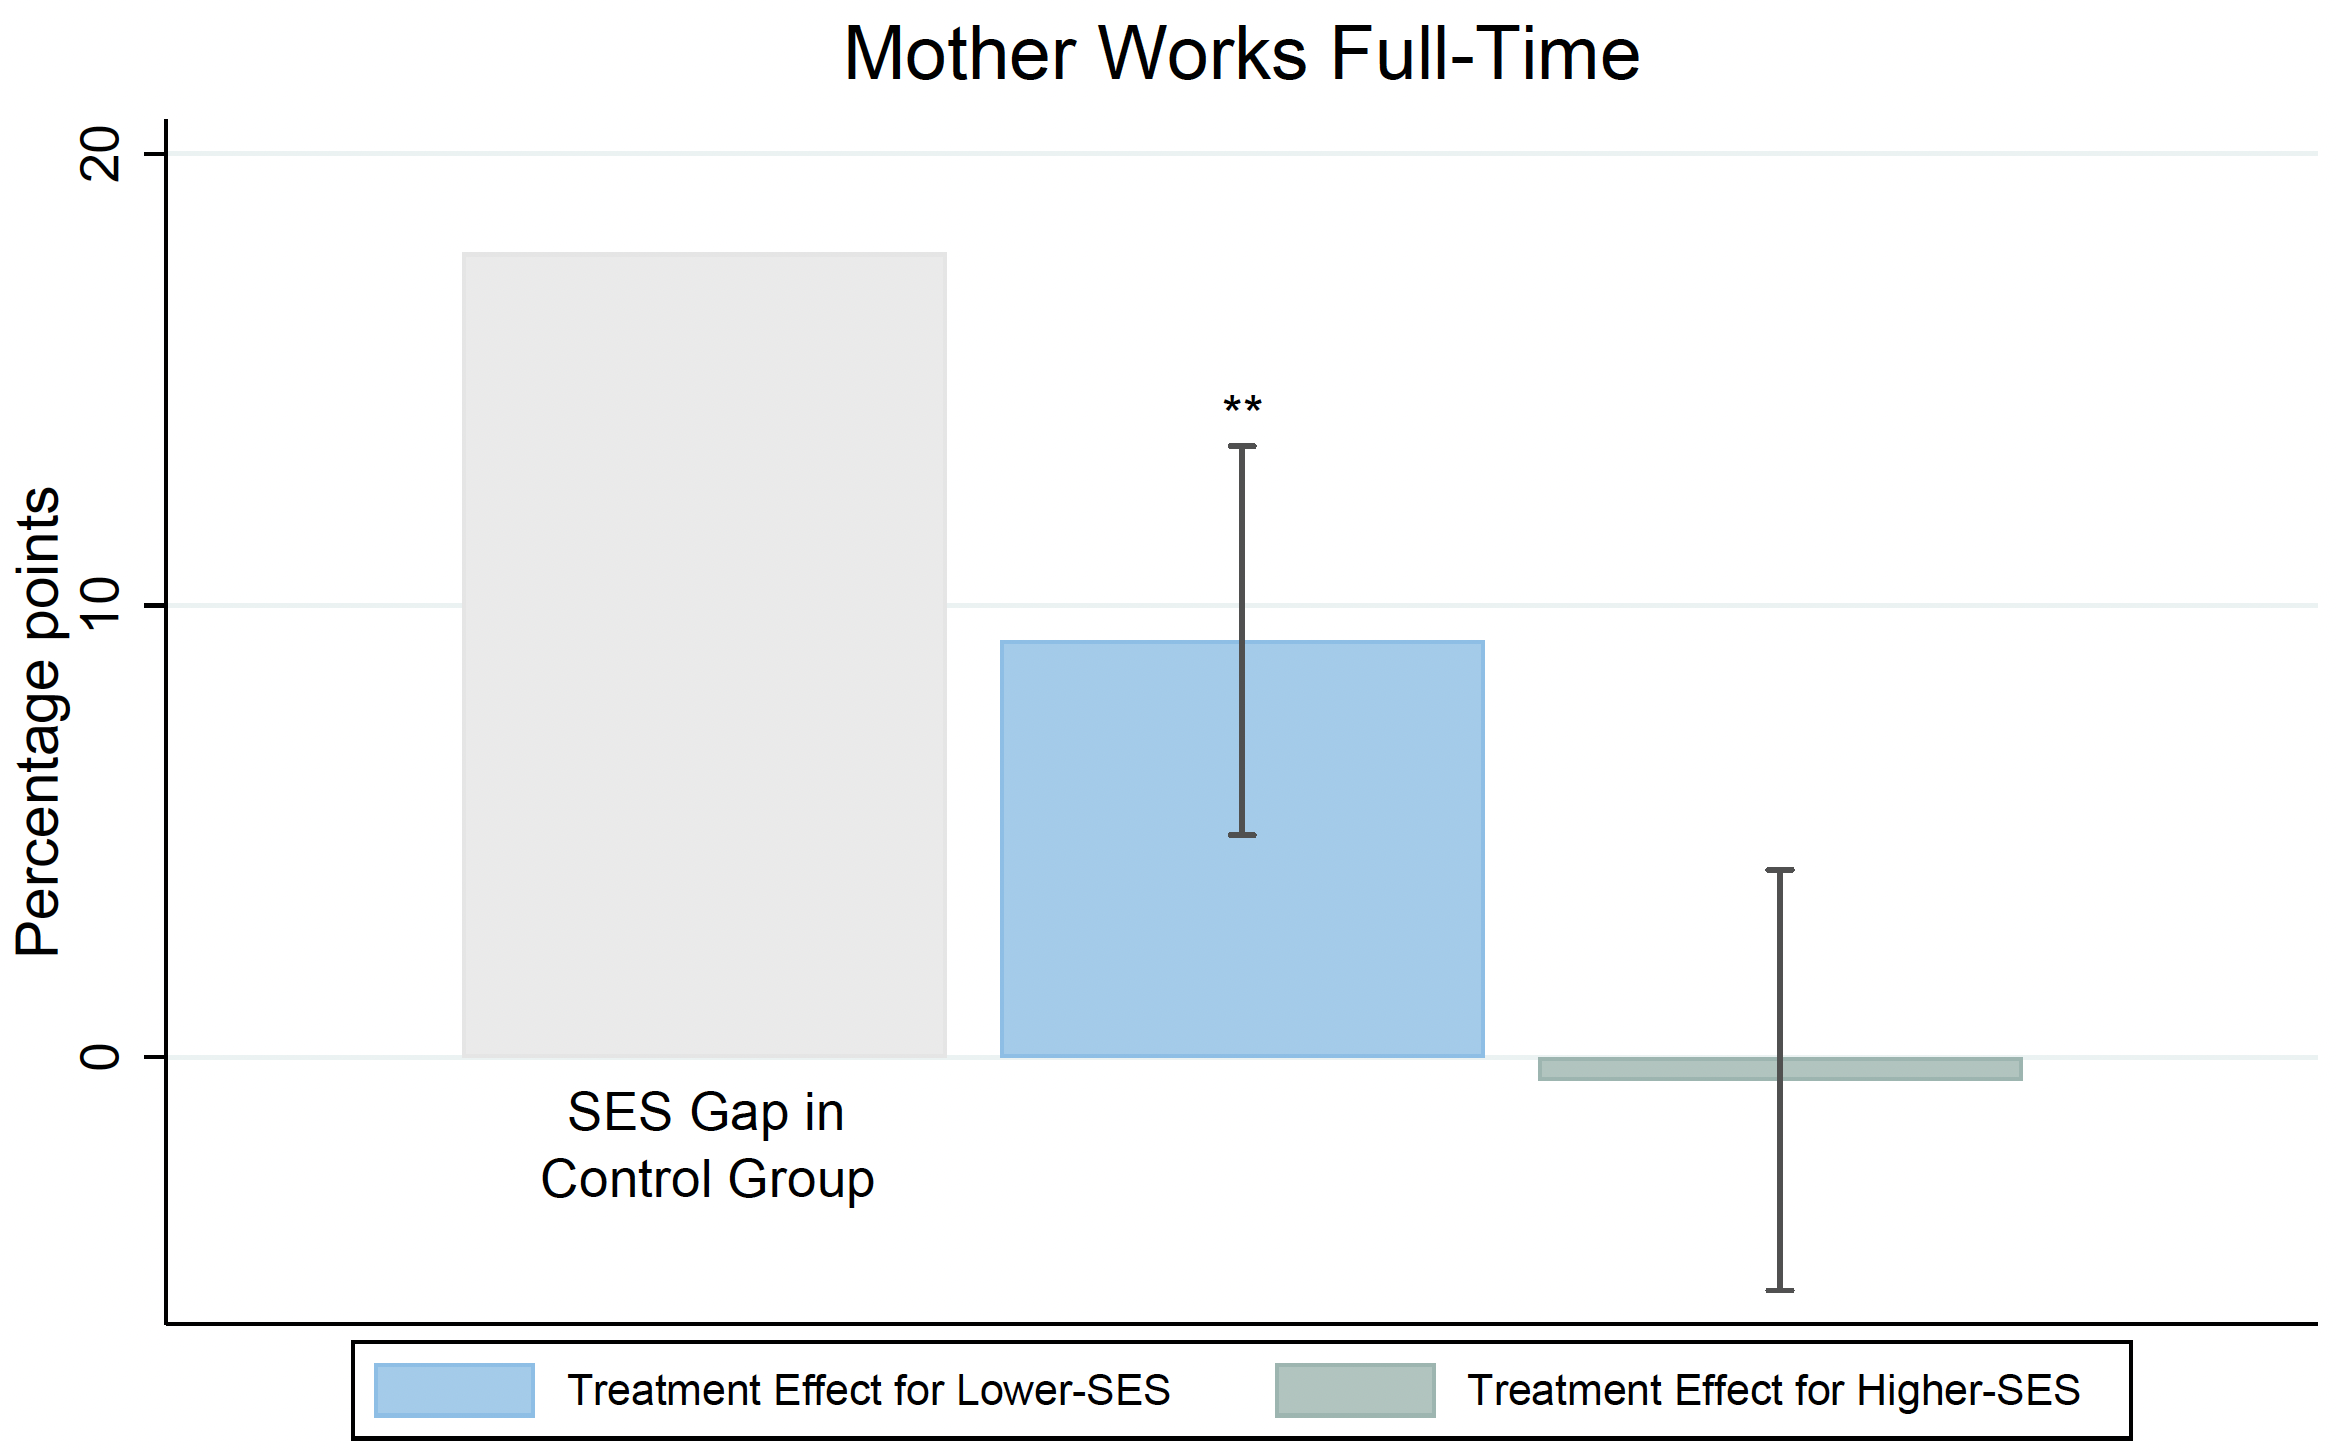 Figure 1 Treatment effects on maternal full-time employment